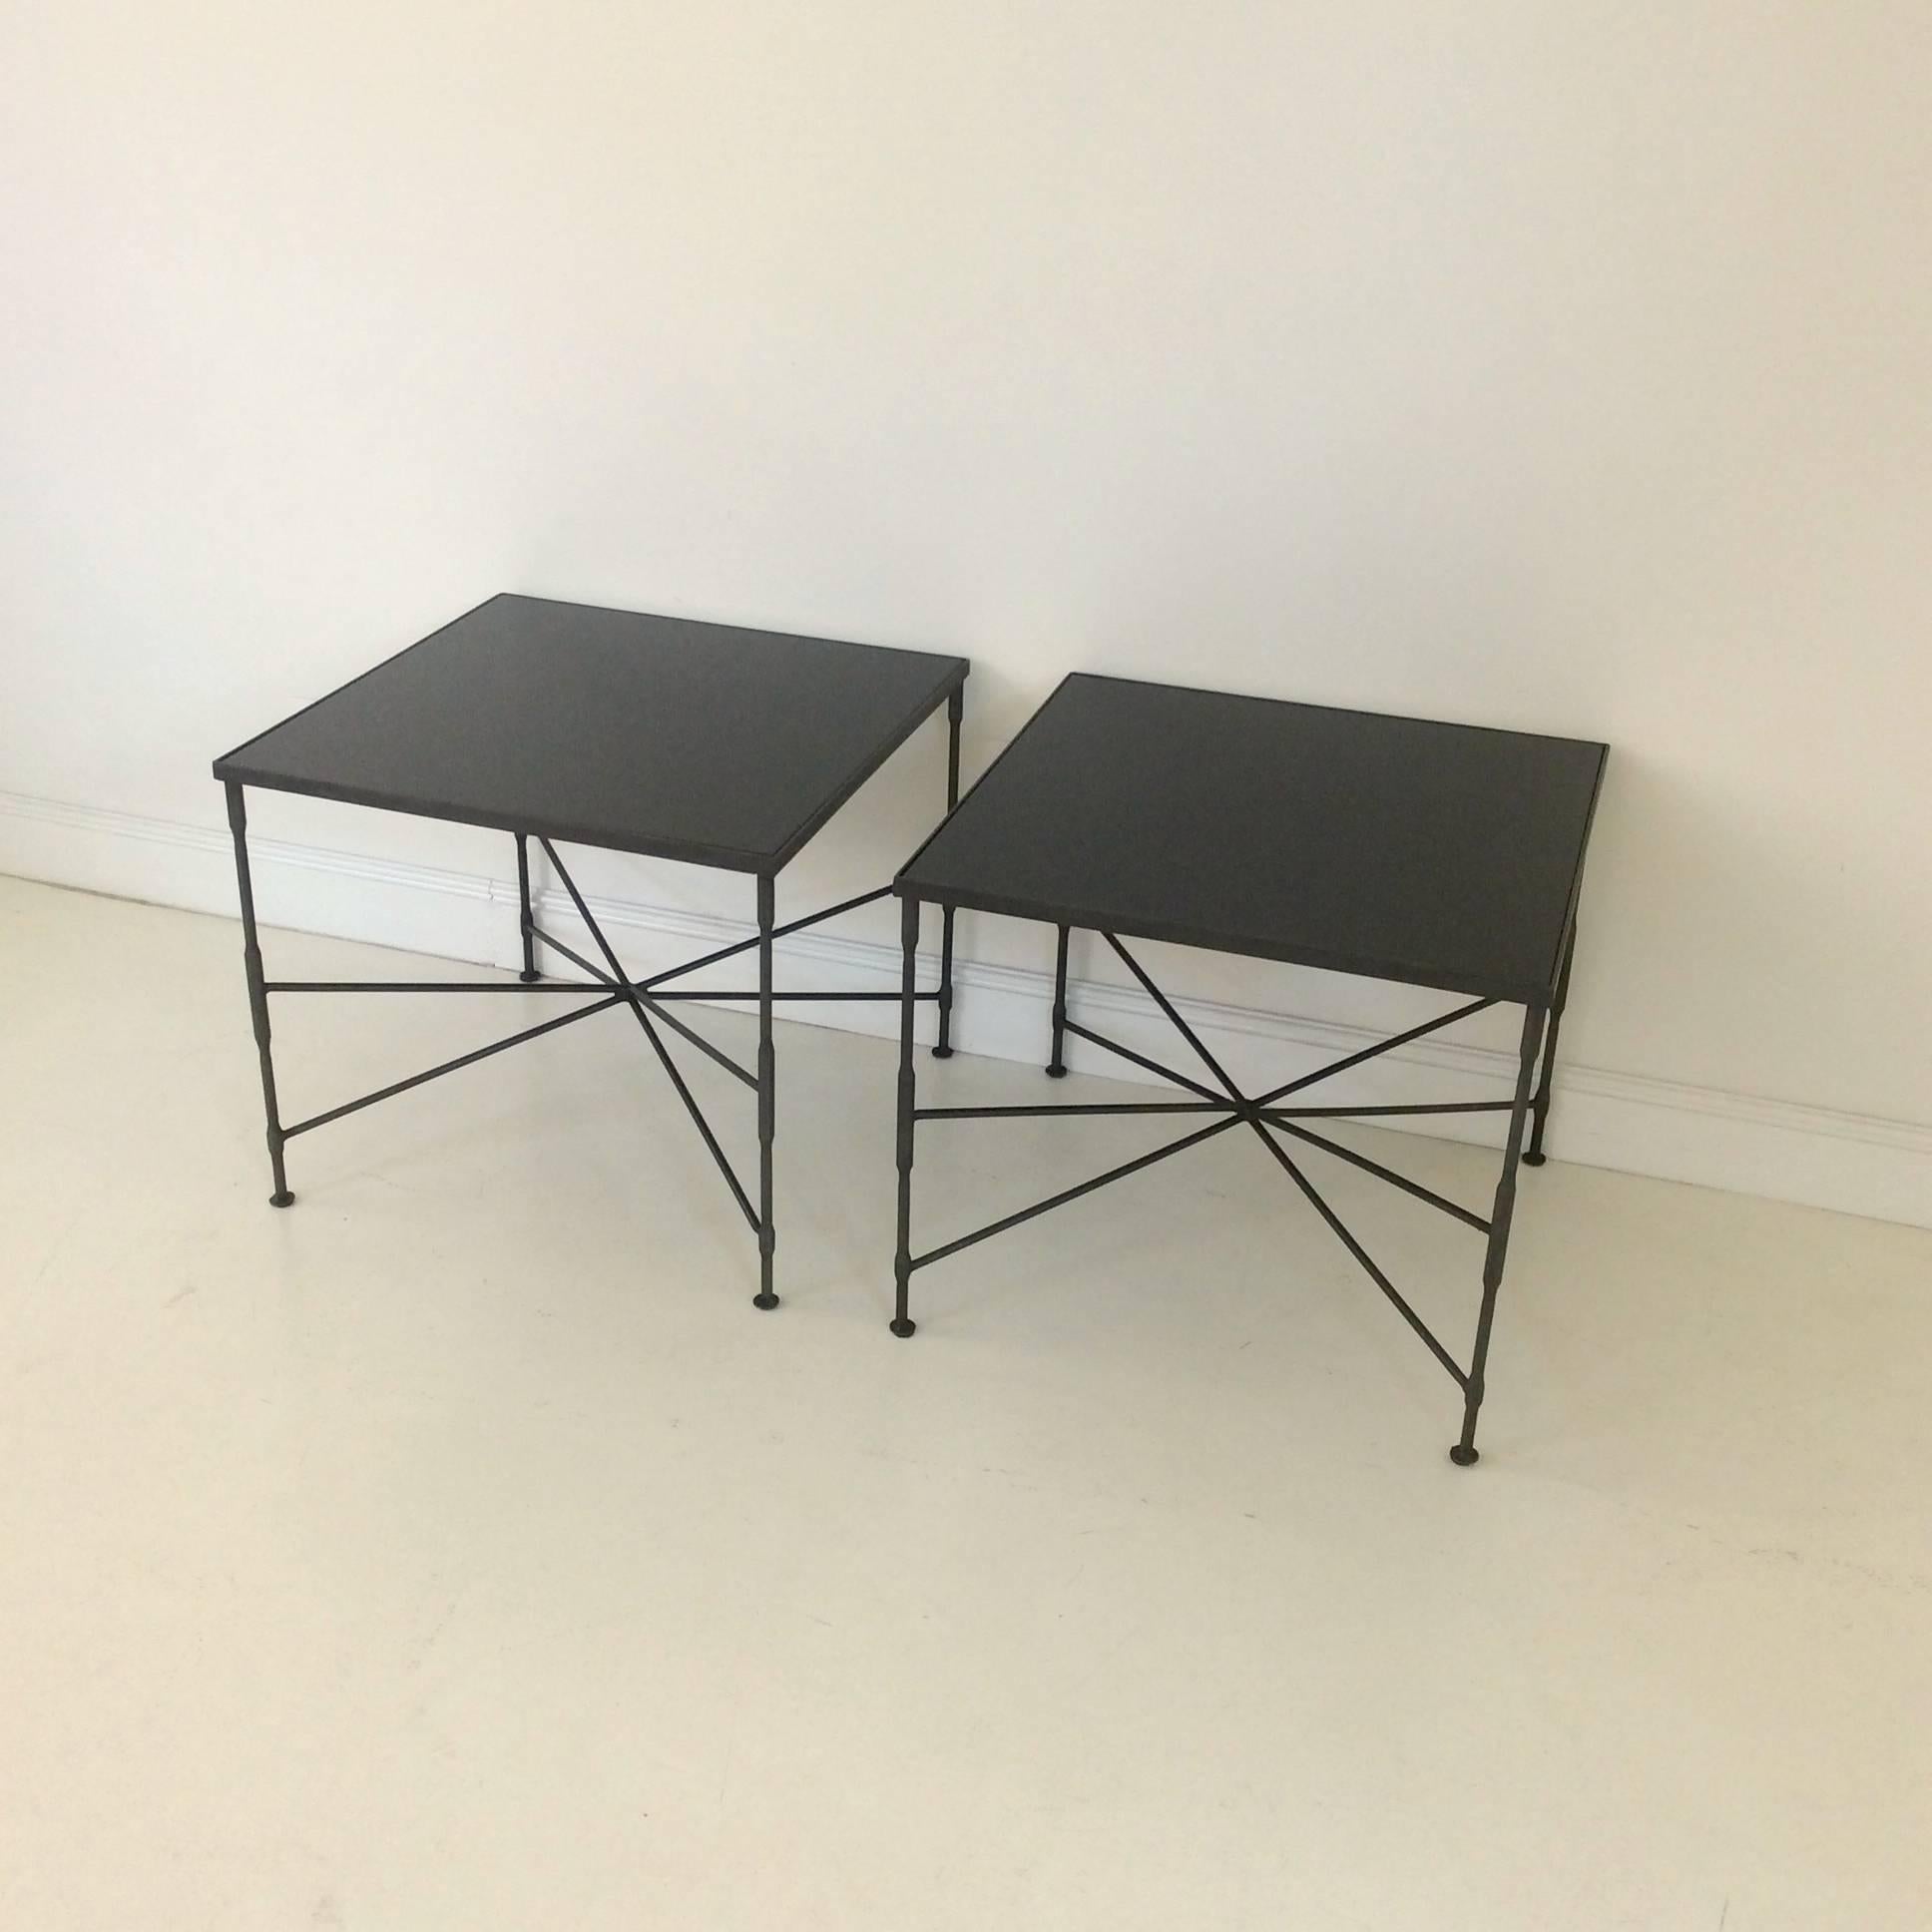 Pair of side tables, circa 1970, France.
Anthracite tubular metal, black glass top.
Dimensions: 52 cm H, 60 cm W, 60 cm D.
Good original condition.
We ship worldwide !
 